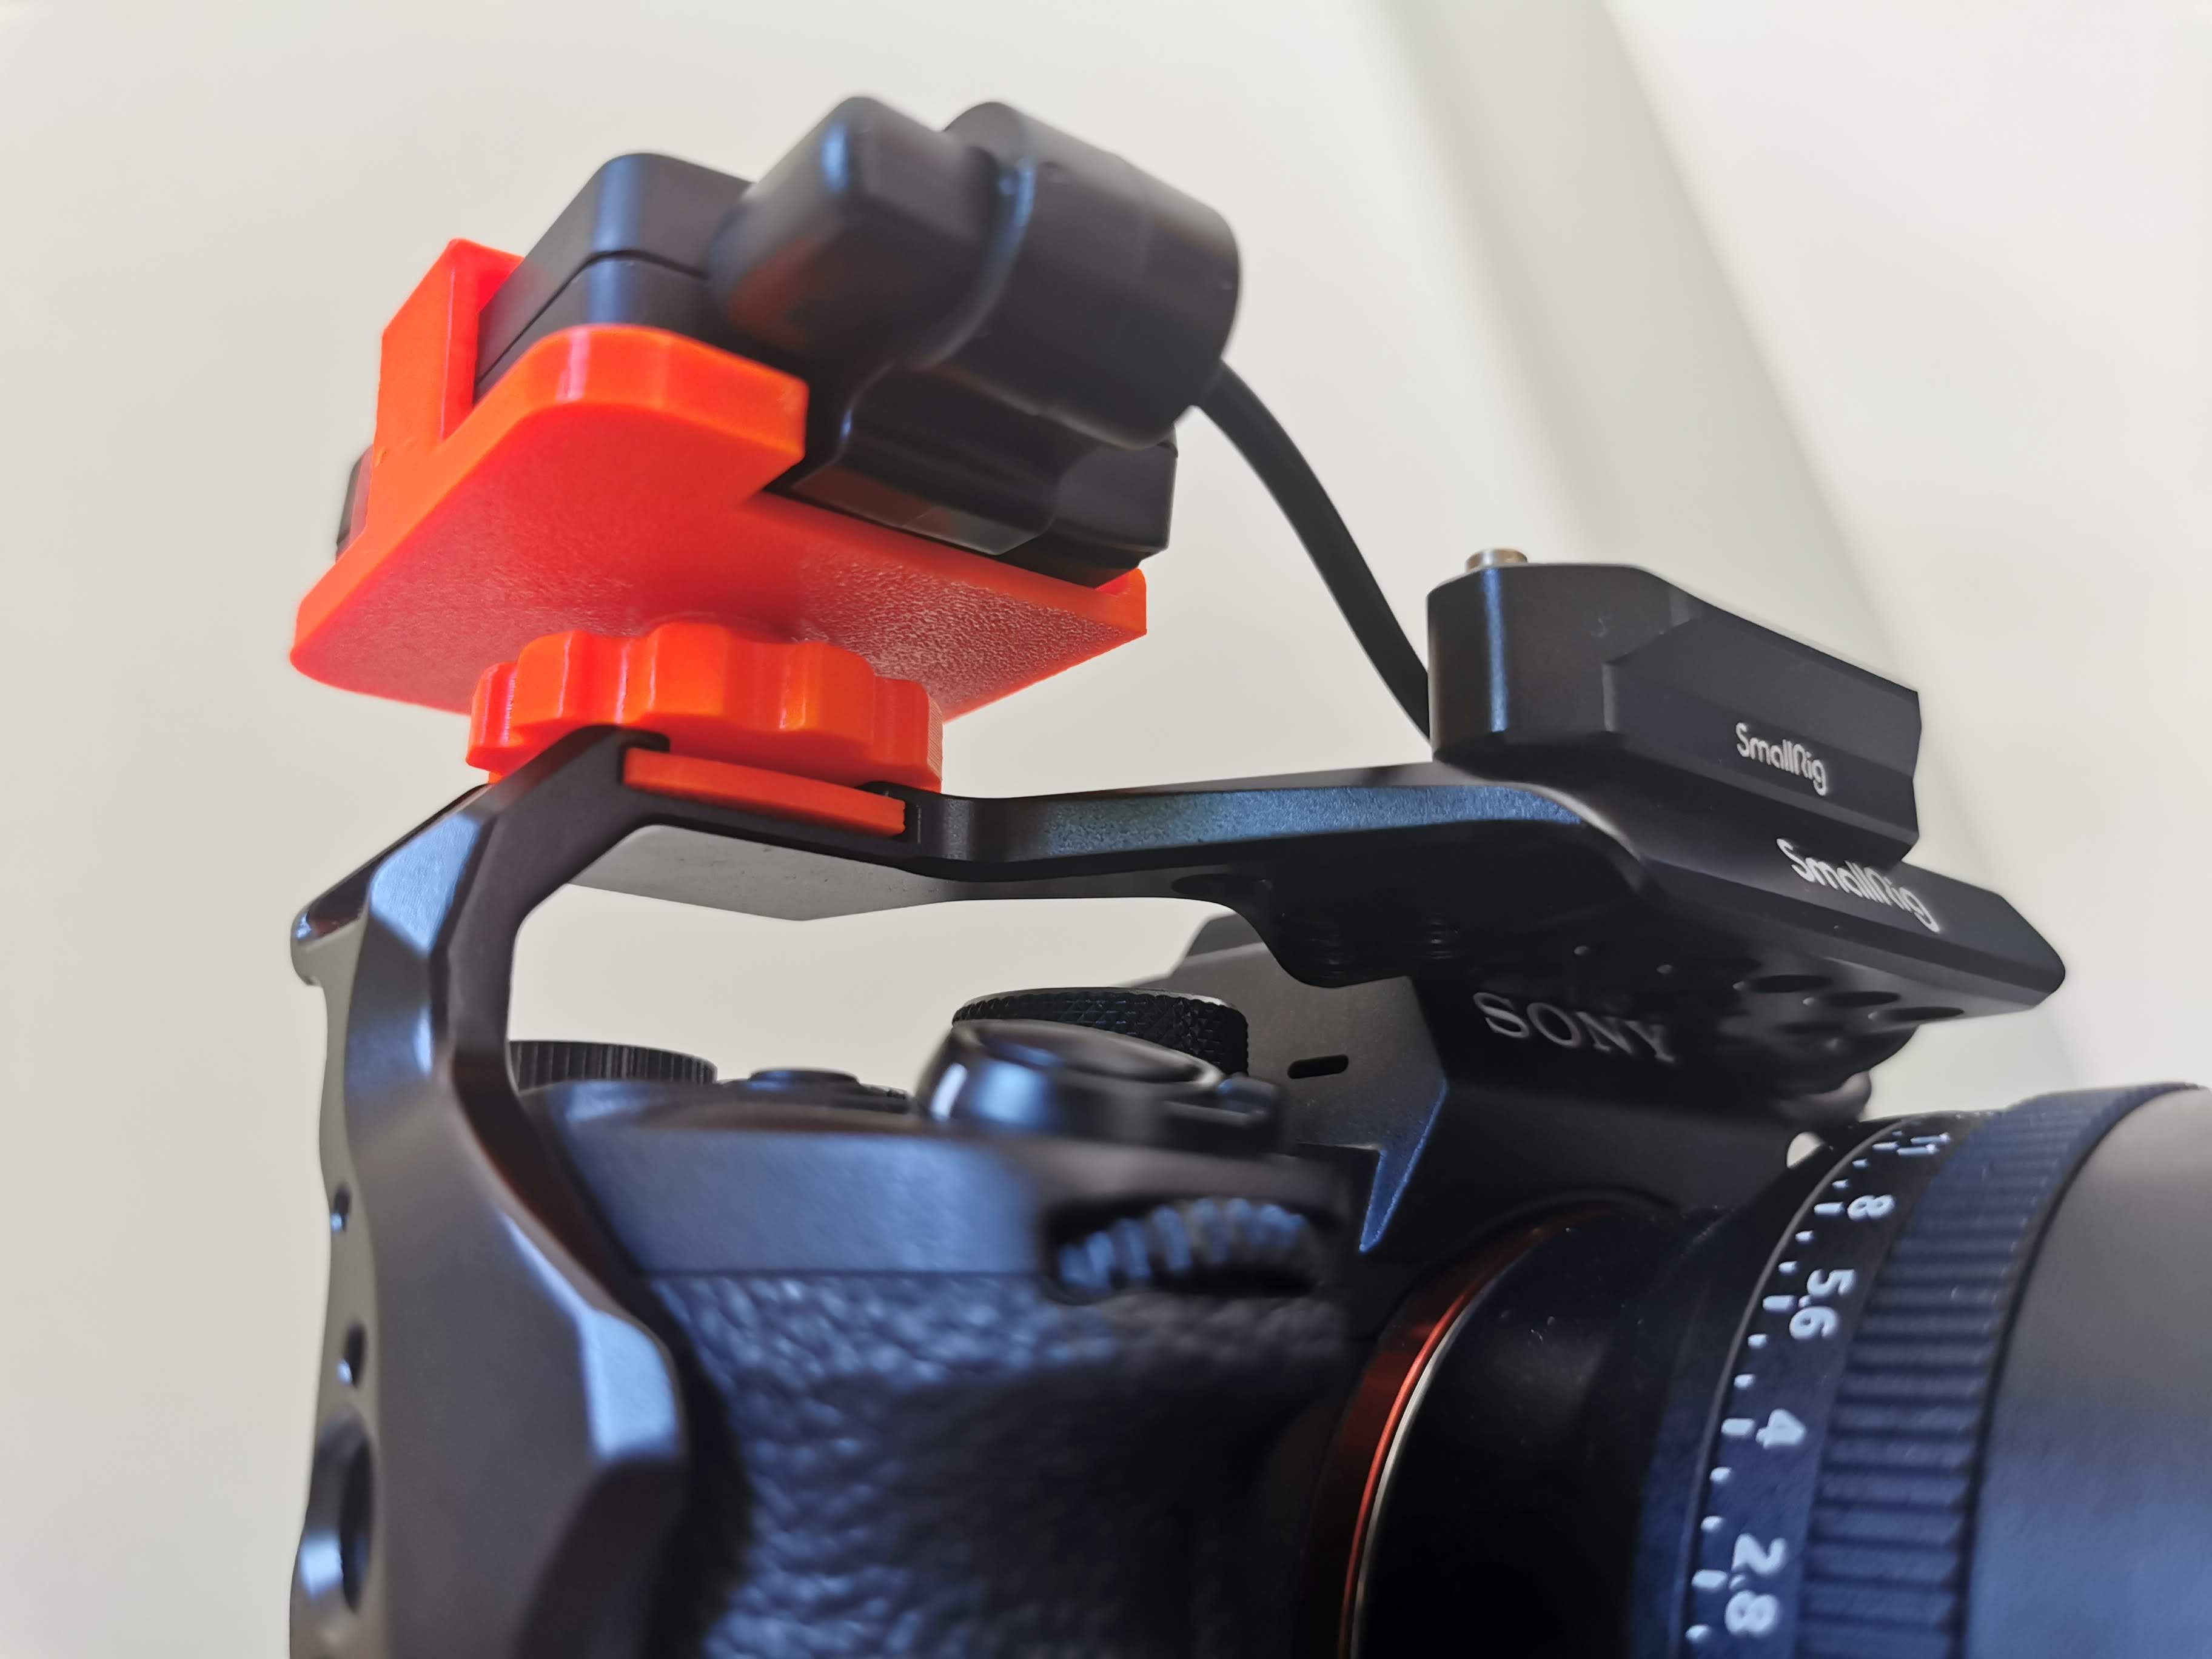 Cold shoe mount for Tentacle SYNC E